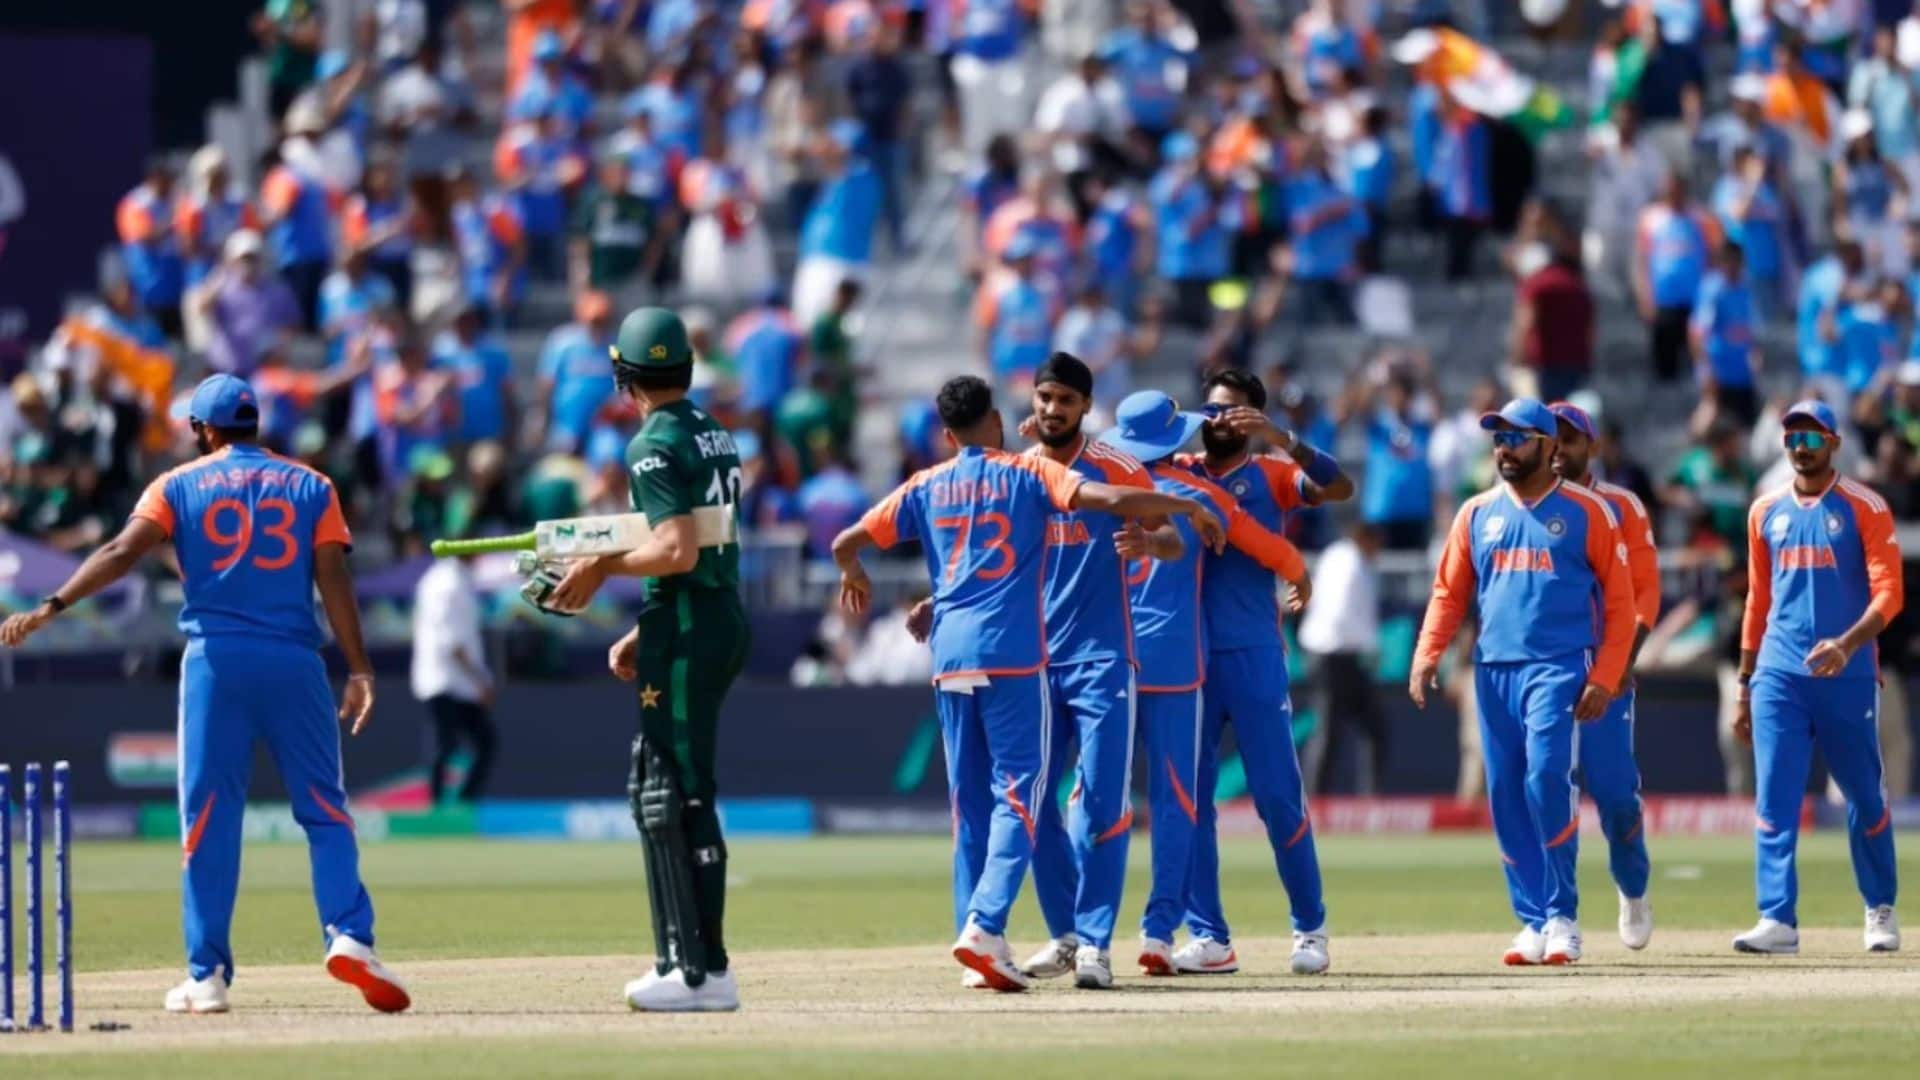 Indian players celebrating win over Pakistan [X]